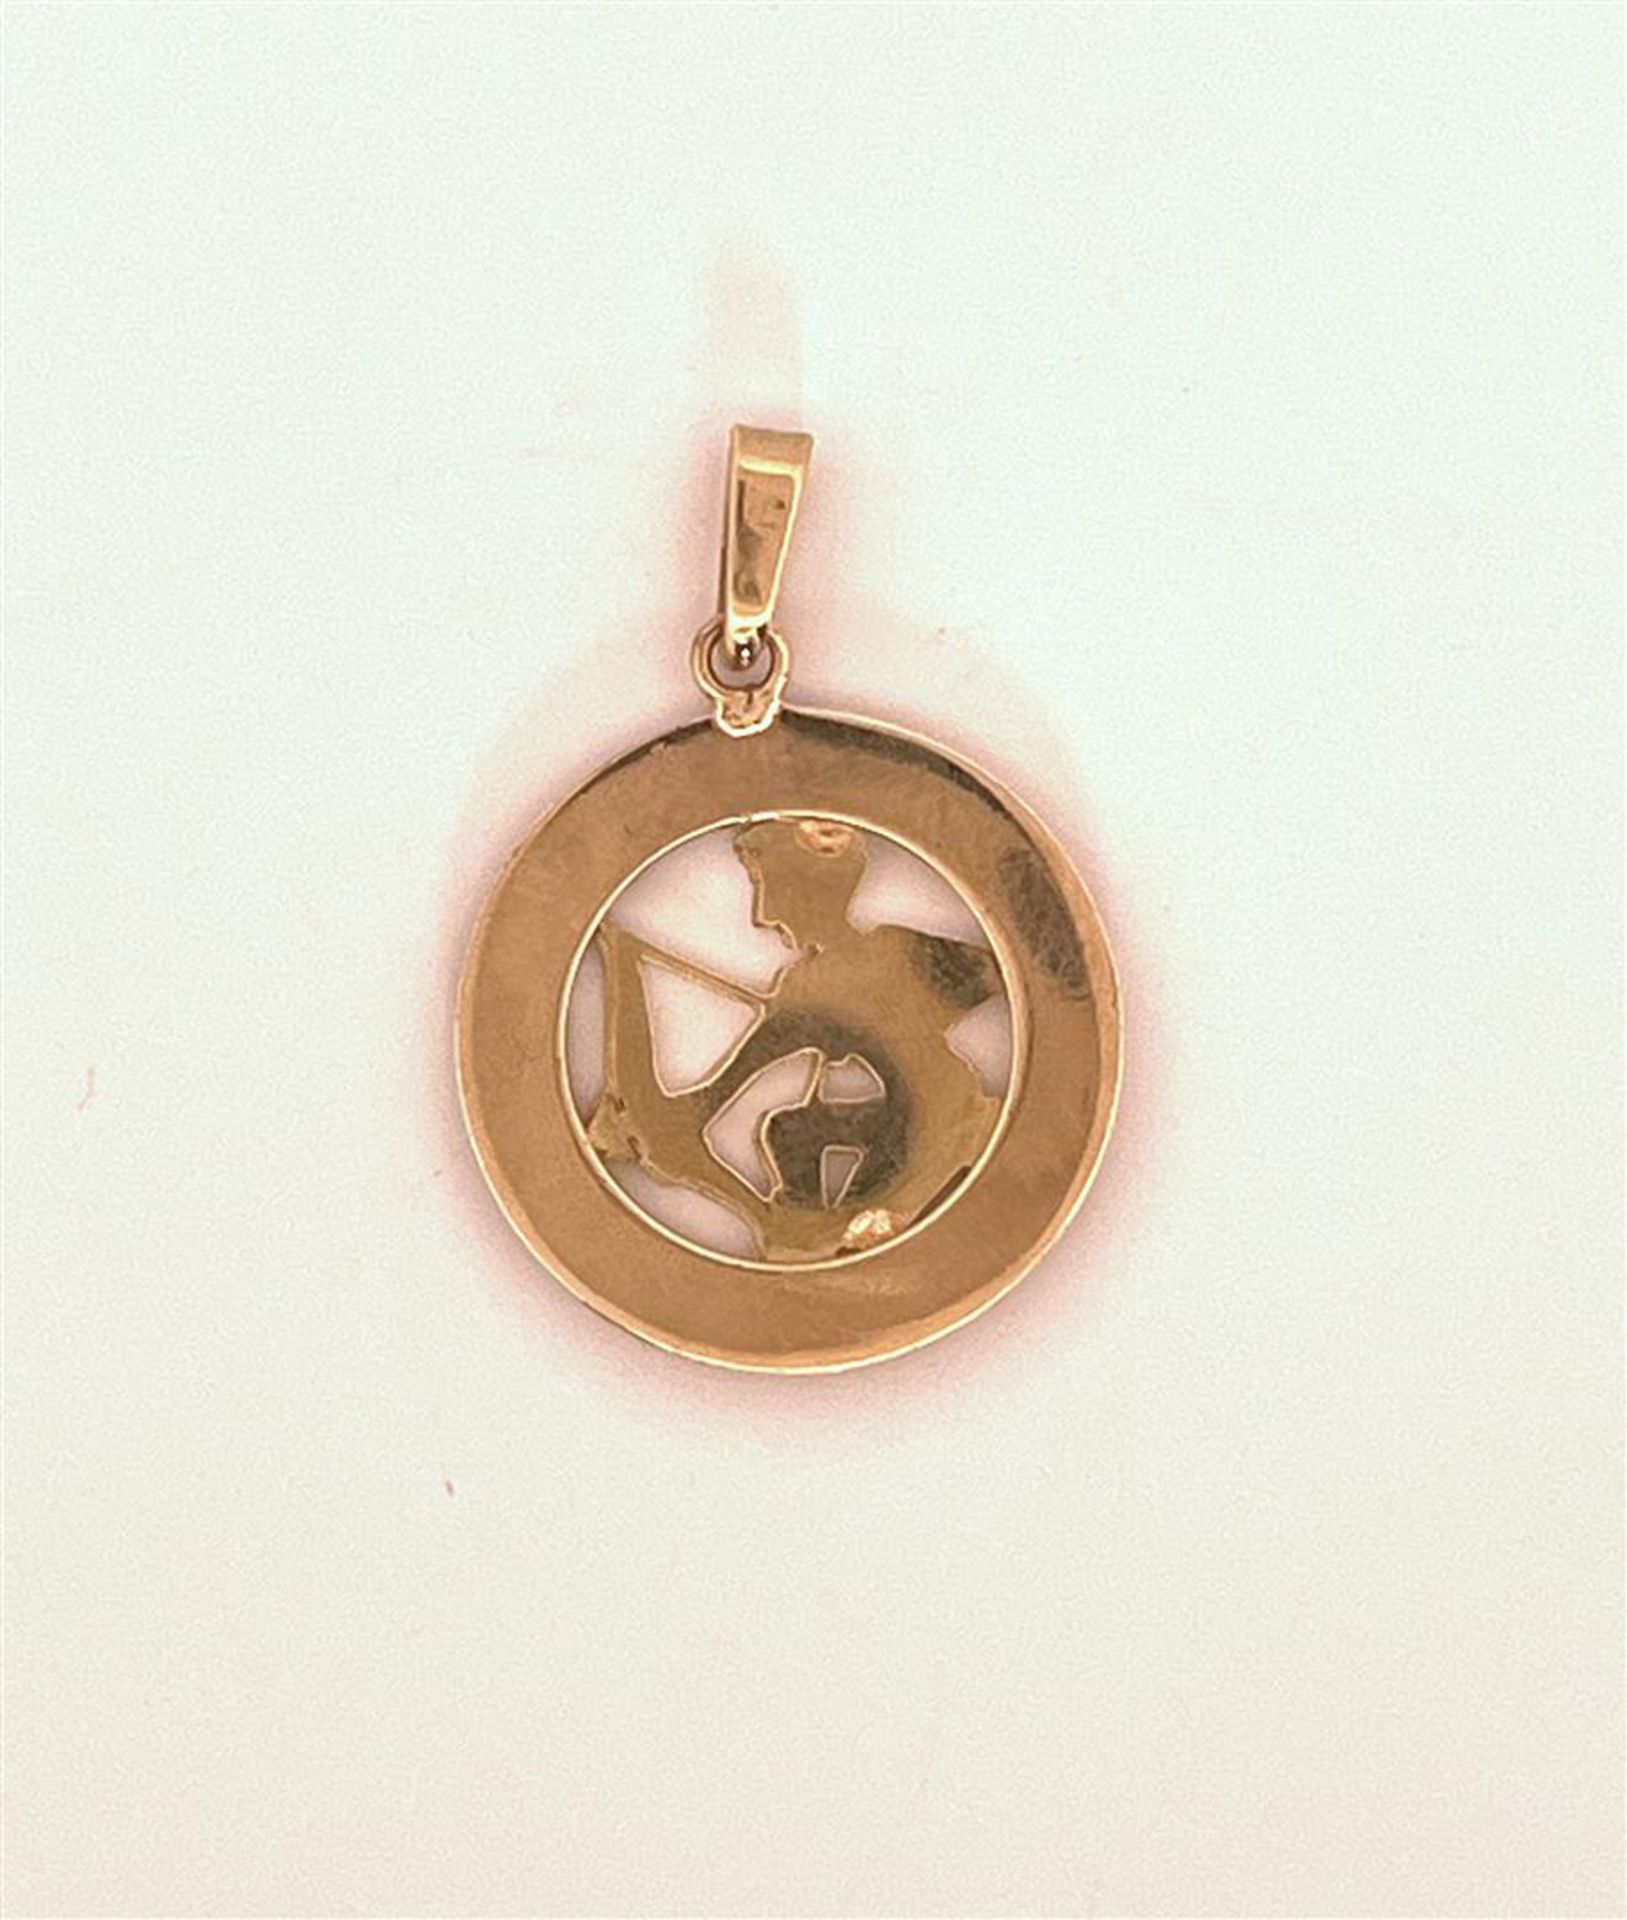 14kt yellow gold bowchutter pendant.
The Sagittarius horoscope is depicted on this pendant. The pend - Bild 2 aus 2